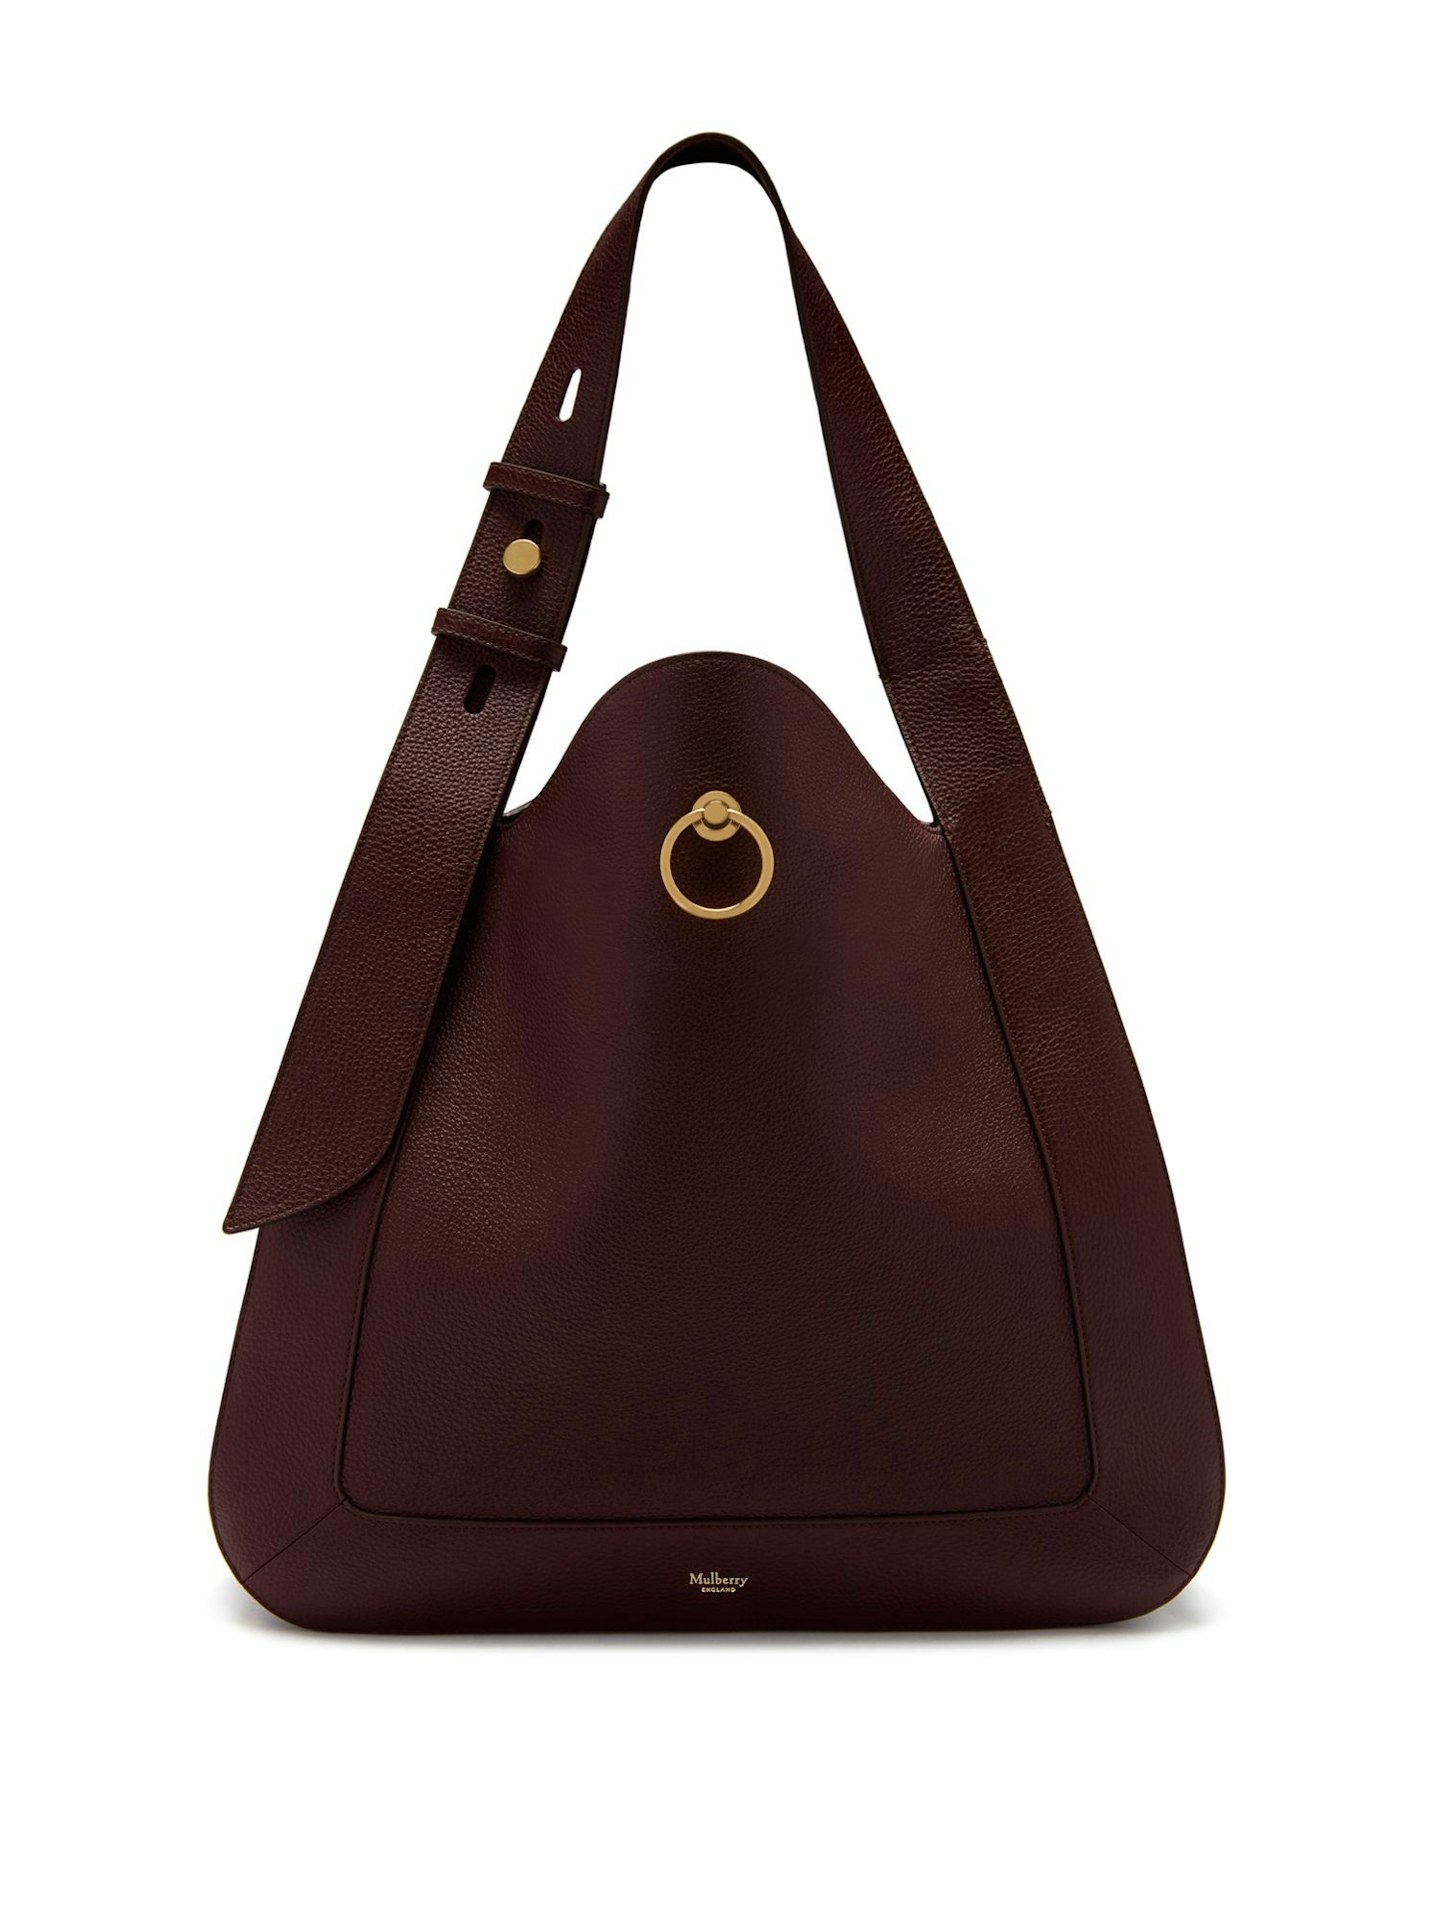 Currently, Craving House Of Fraser’s Minimalist Bags